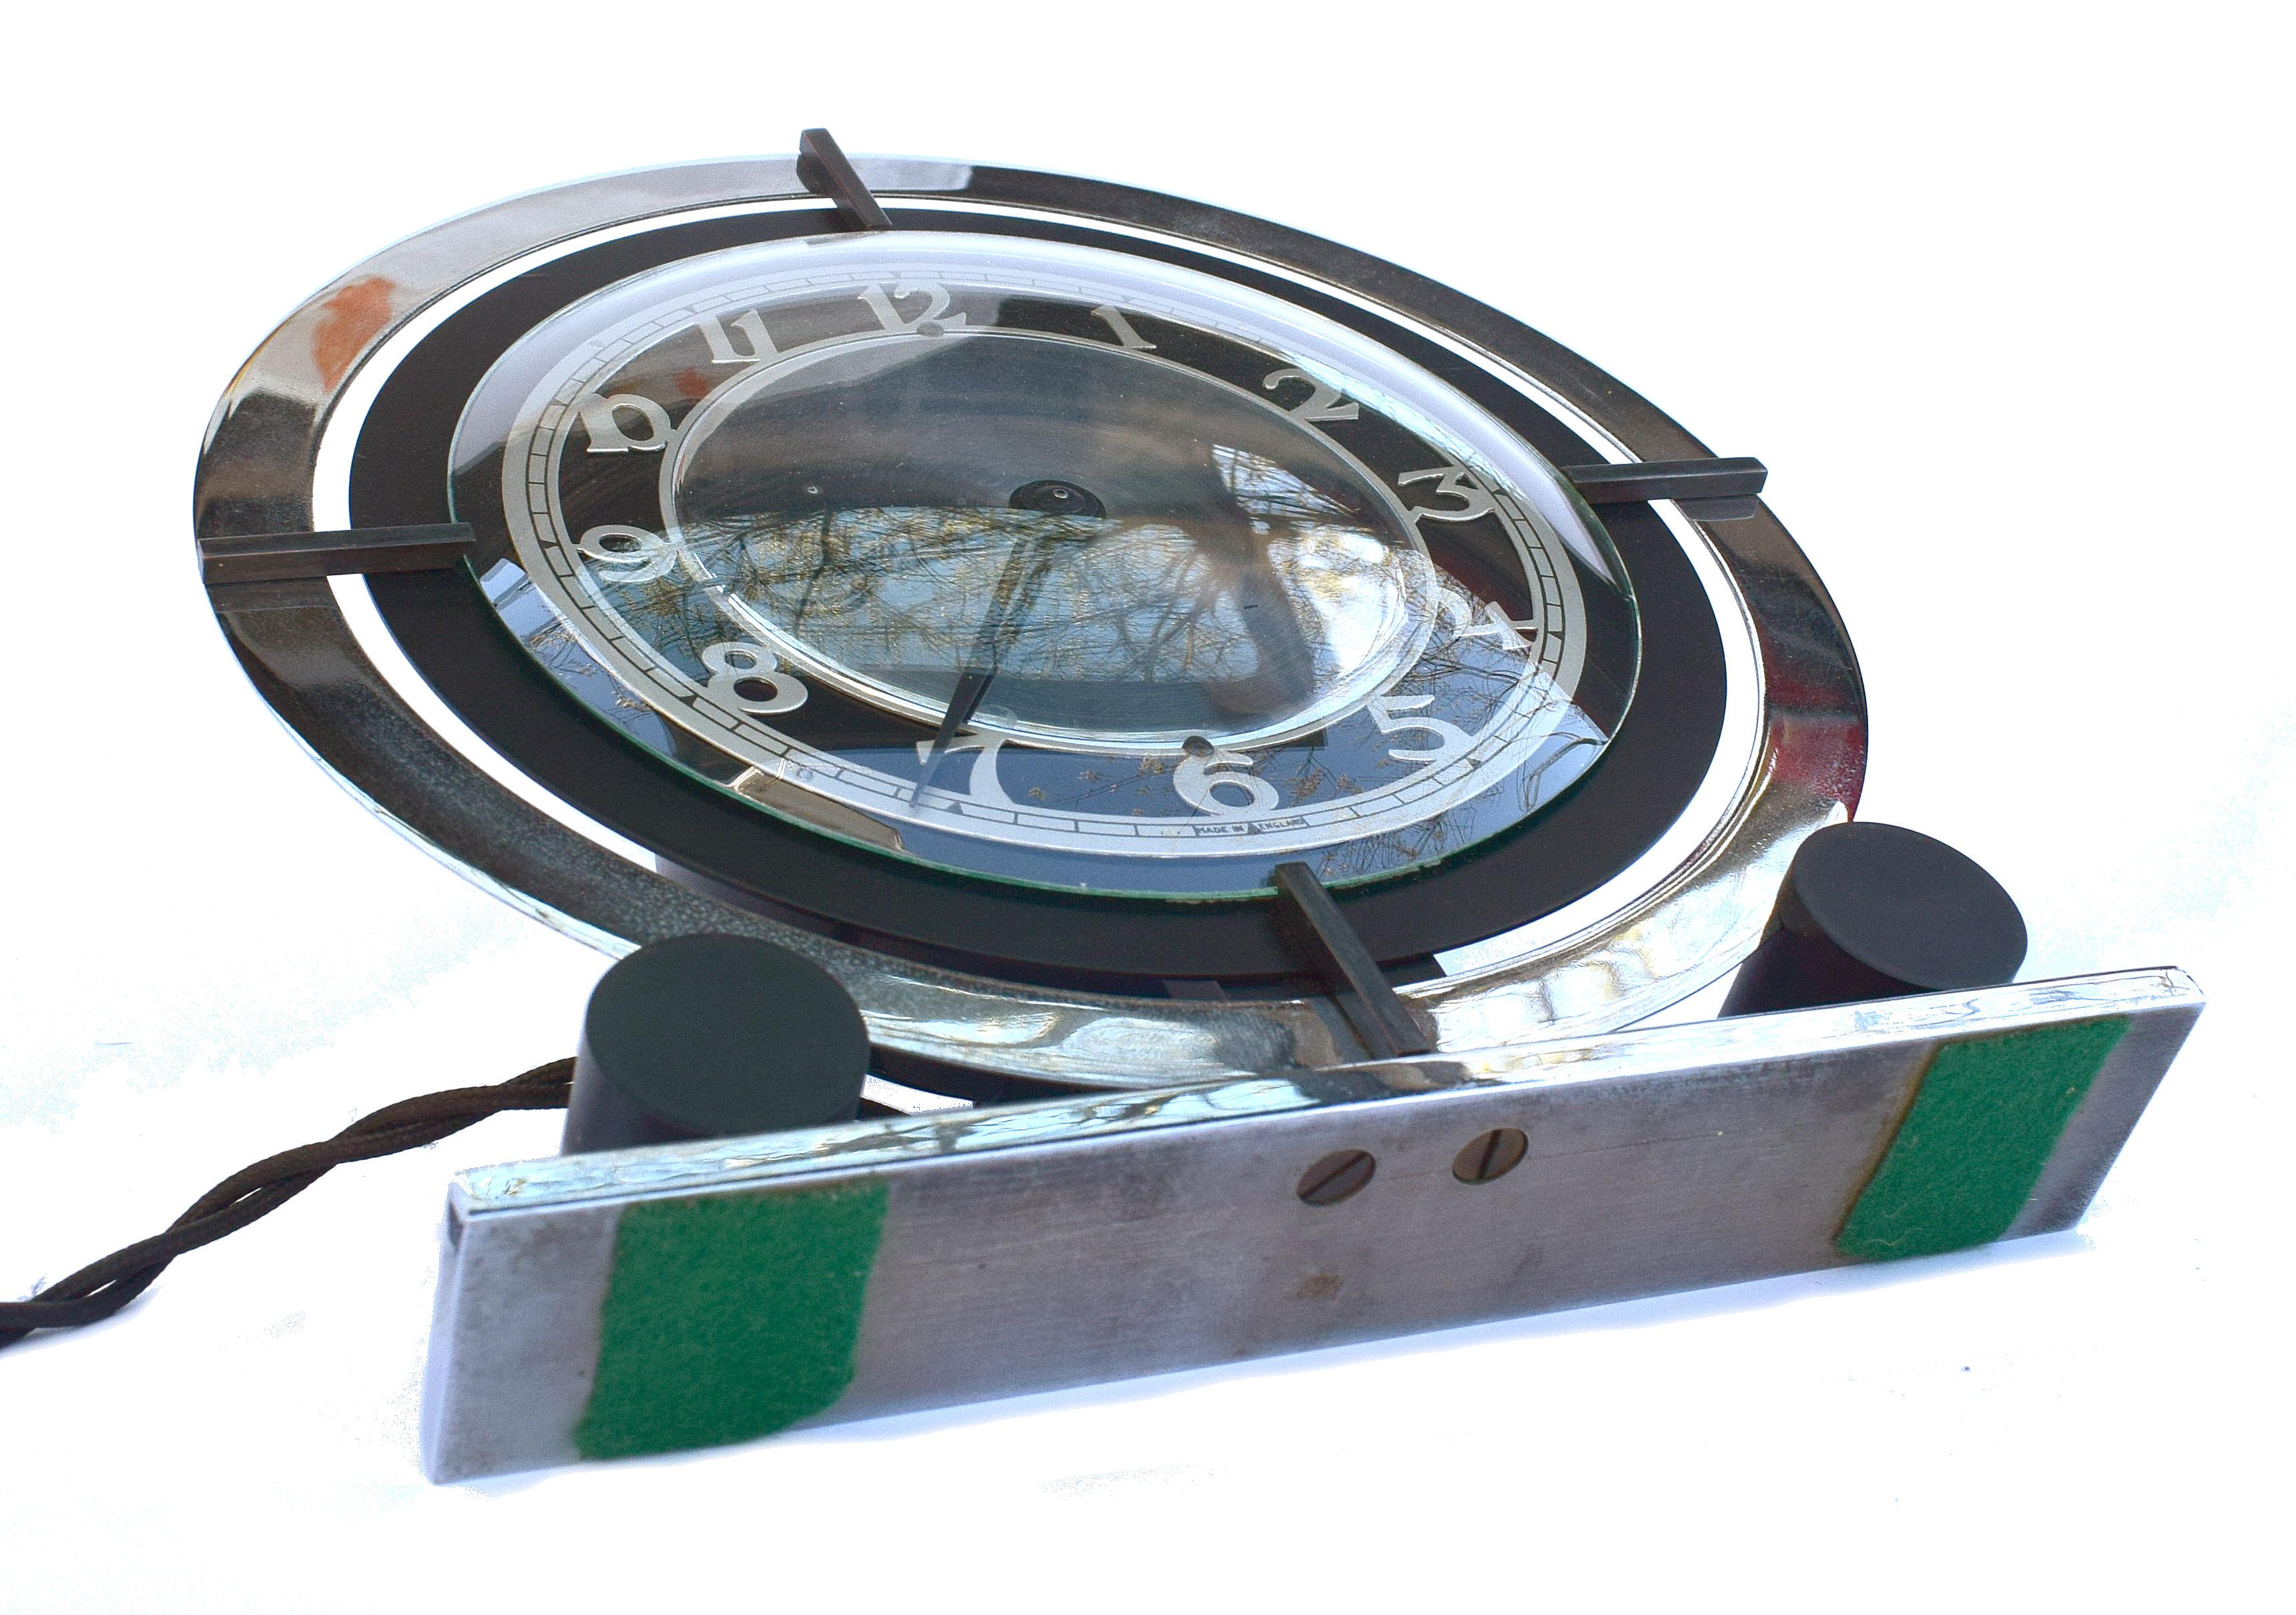 20th Century Art Deco Modernist Chrome And Bakelite Electric Clock By Temco